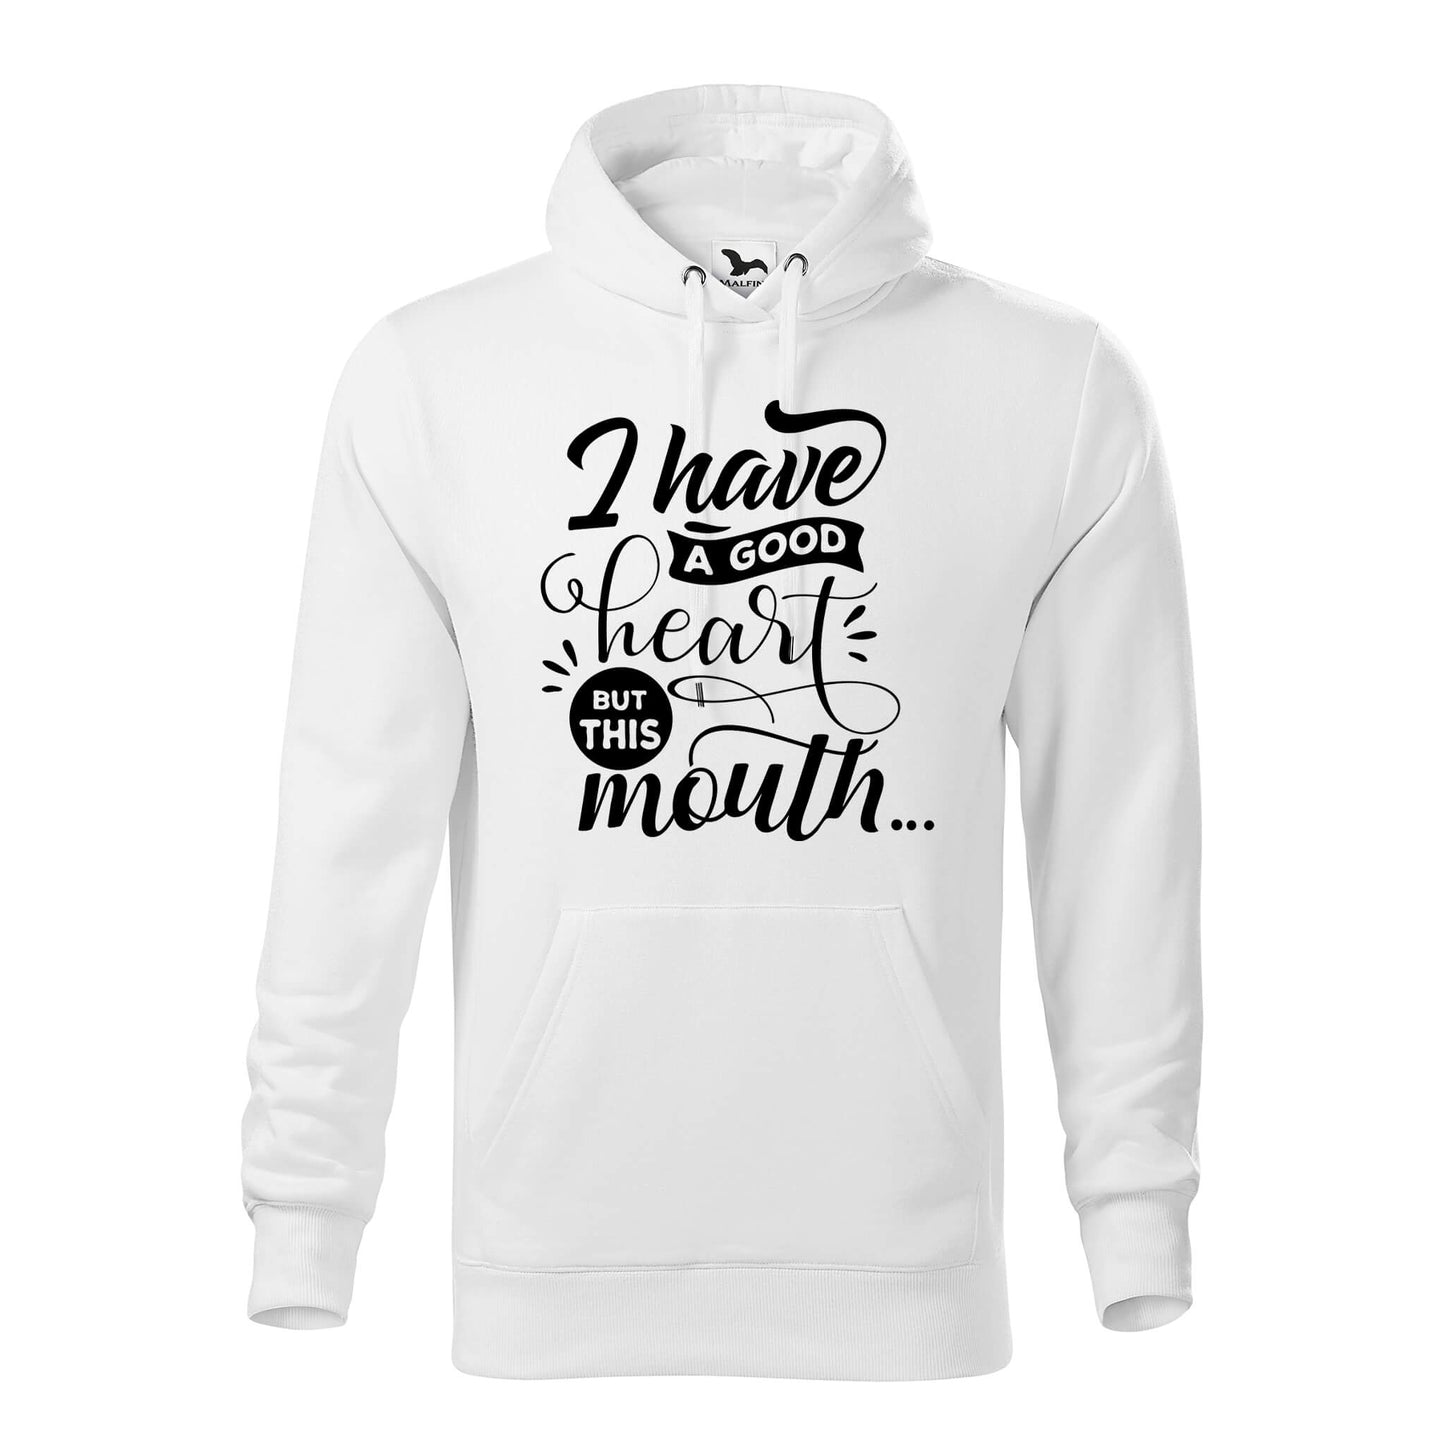 I have a good heart but this mouth hoodie - rvdesignprint